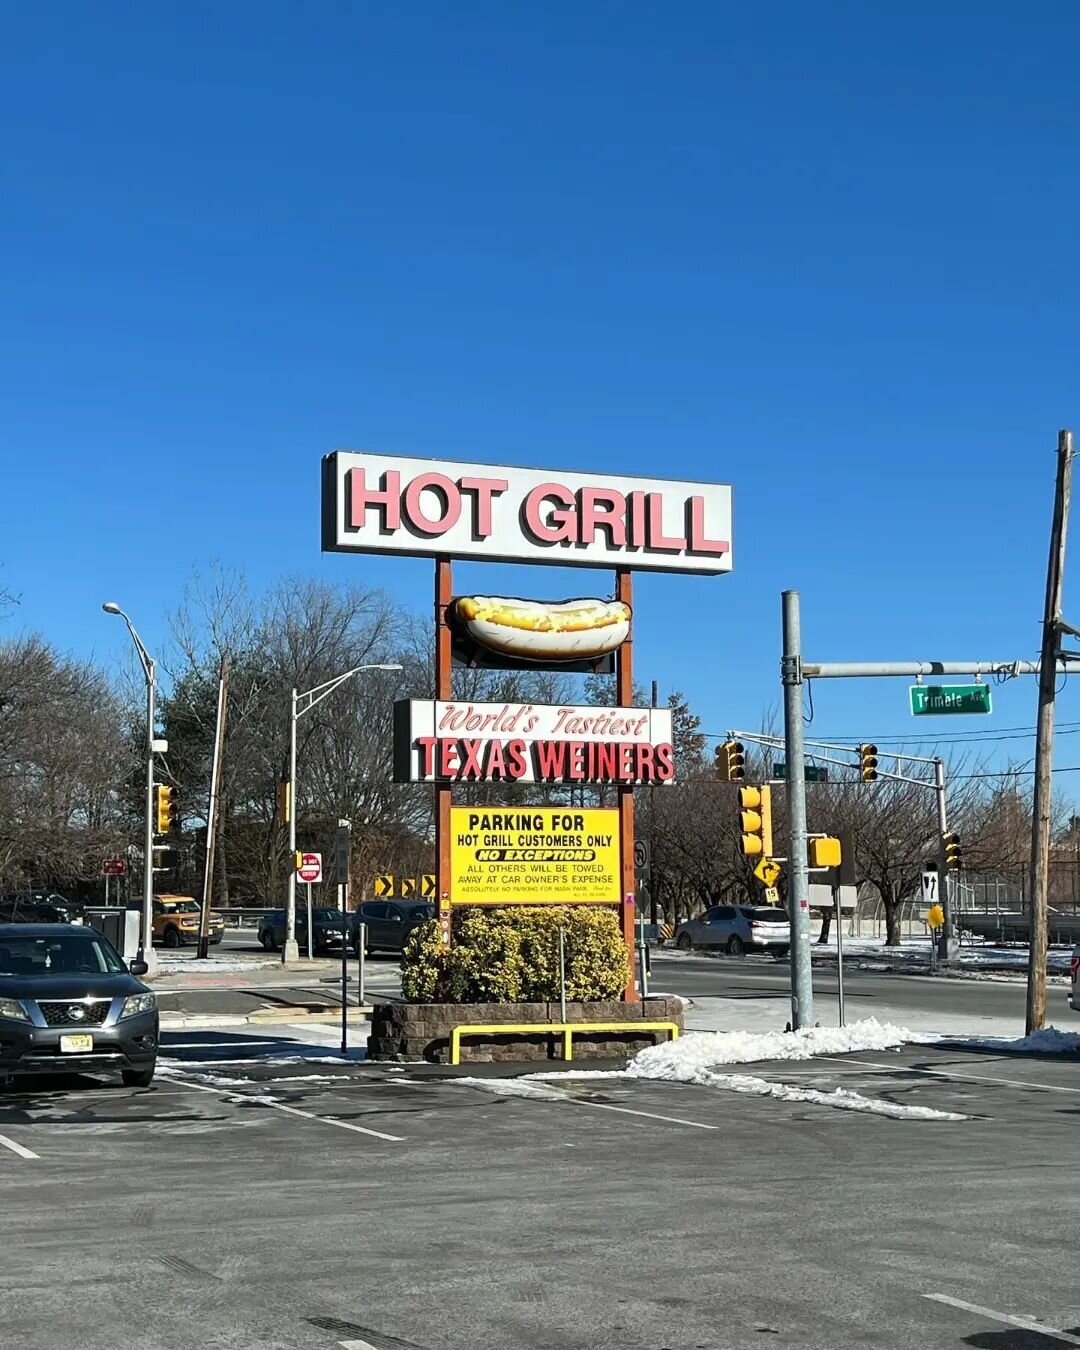 Thanks for visiting The Hot Grill Lynn! 

For more from Lynn's visit - check out today's stories! 

#thehotgrillofficial #thehotgrillclifton #669lexingtonave #CliftonNJ #worldstastiesttexasweiners #onealltheway 

Had to make a pitstop for a Jersey cl